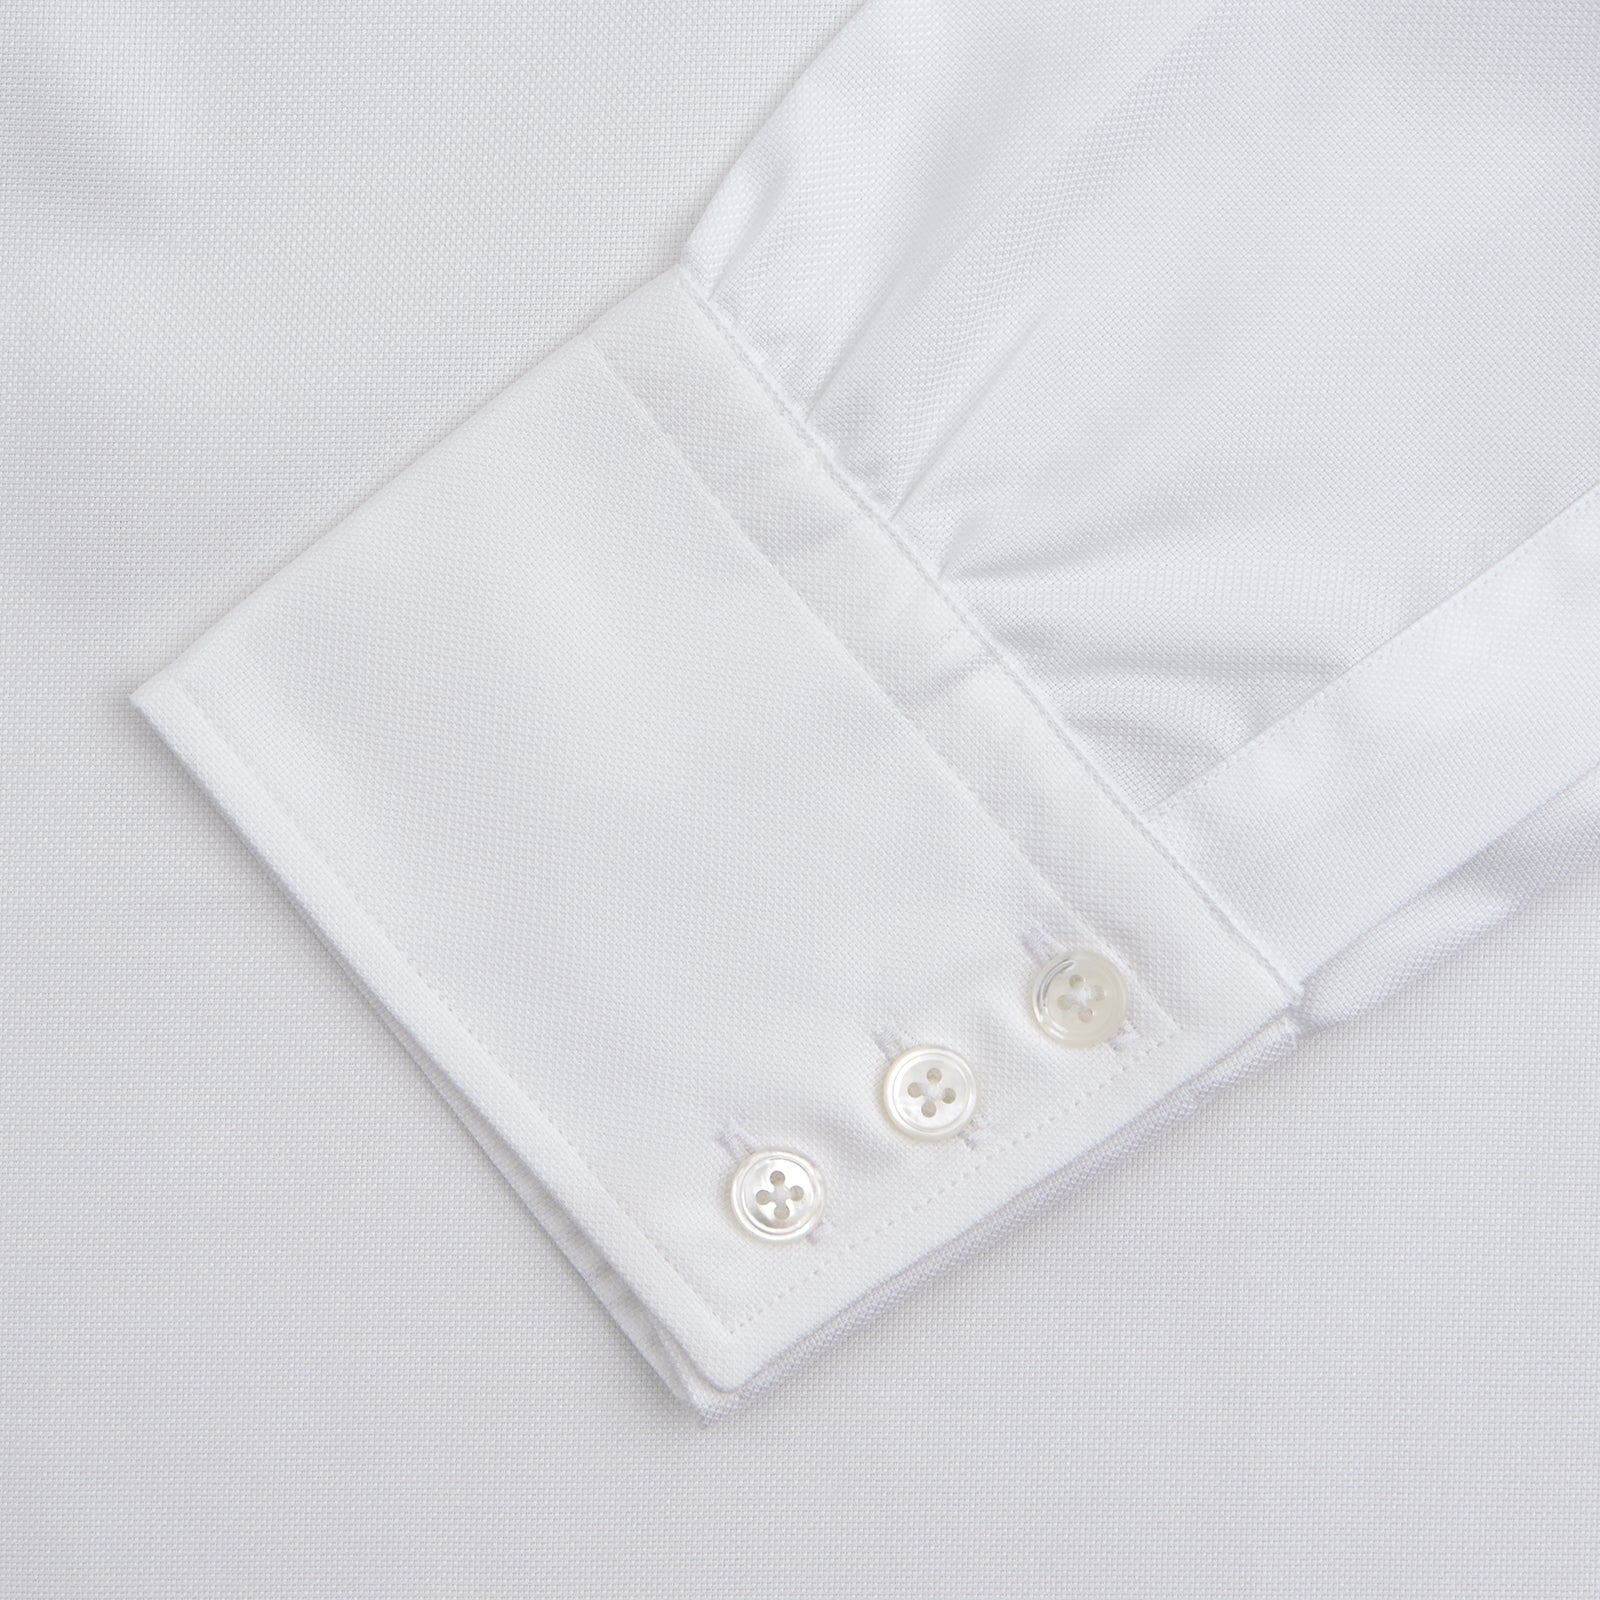 White Superfine Oxford Cotton dress shirt with T&A Collar and 3-Button ...